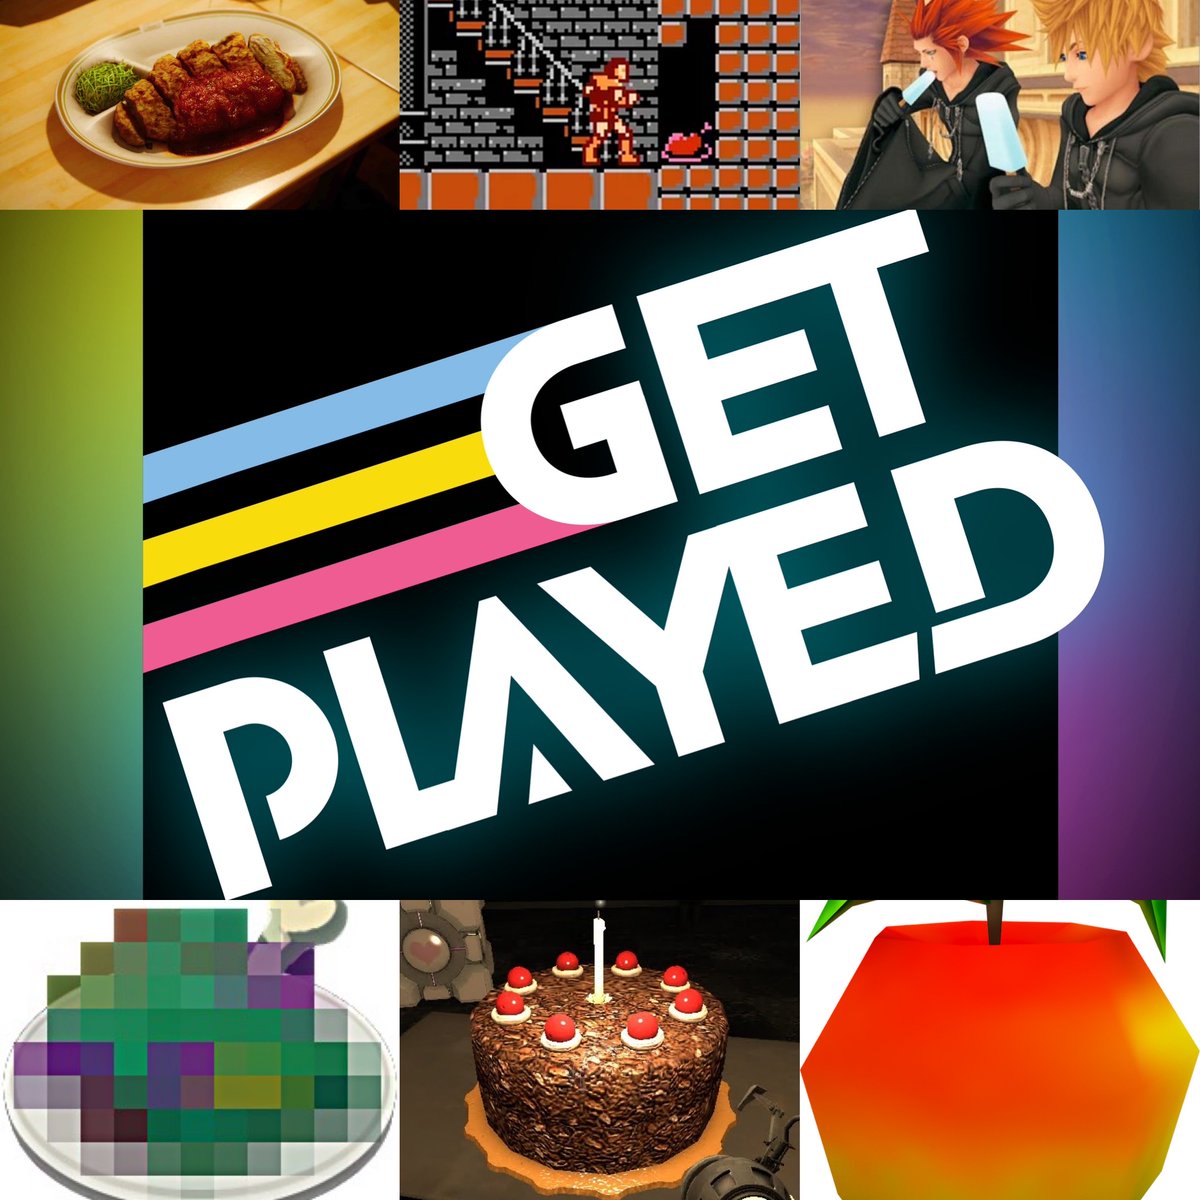 Today on Get Played Matt, Heather and Nick talk discuss the cooking in Final Fantasy XV, foods they want to try from across gaming, video game cereals and more! headgum.com/get-played